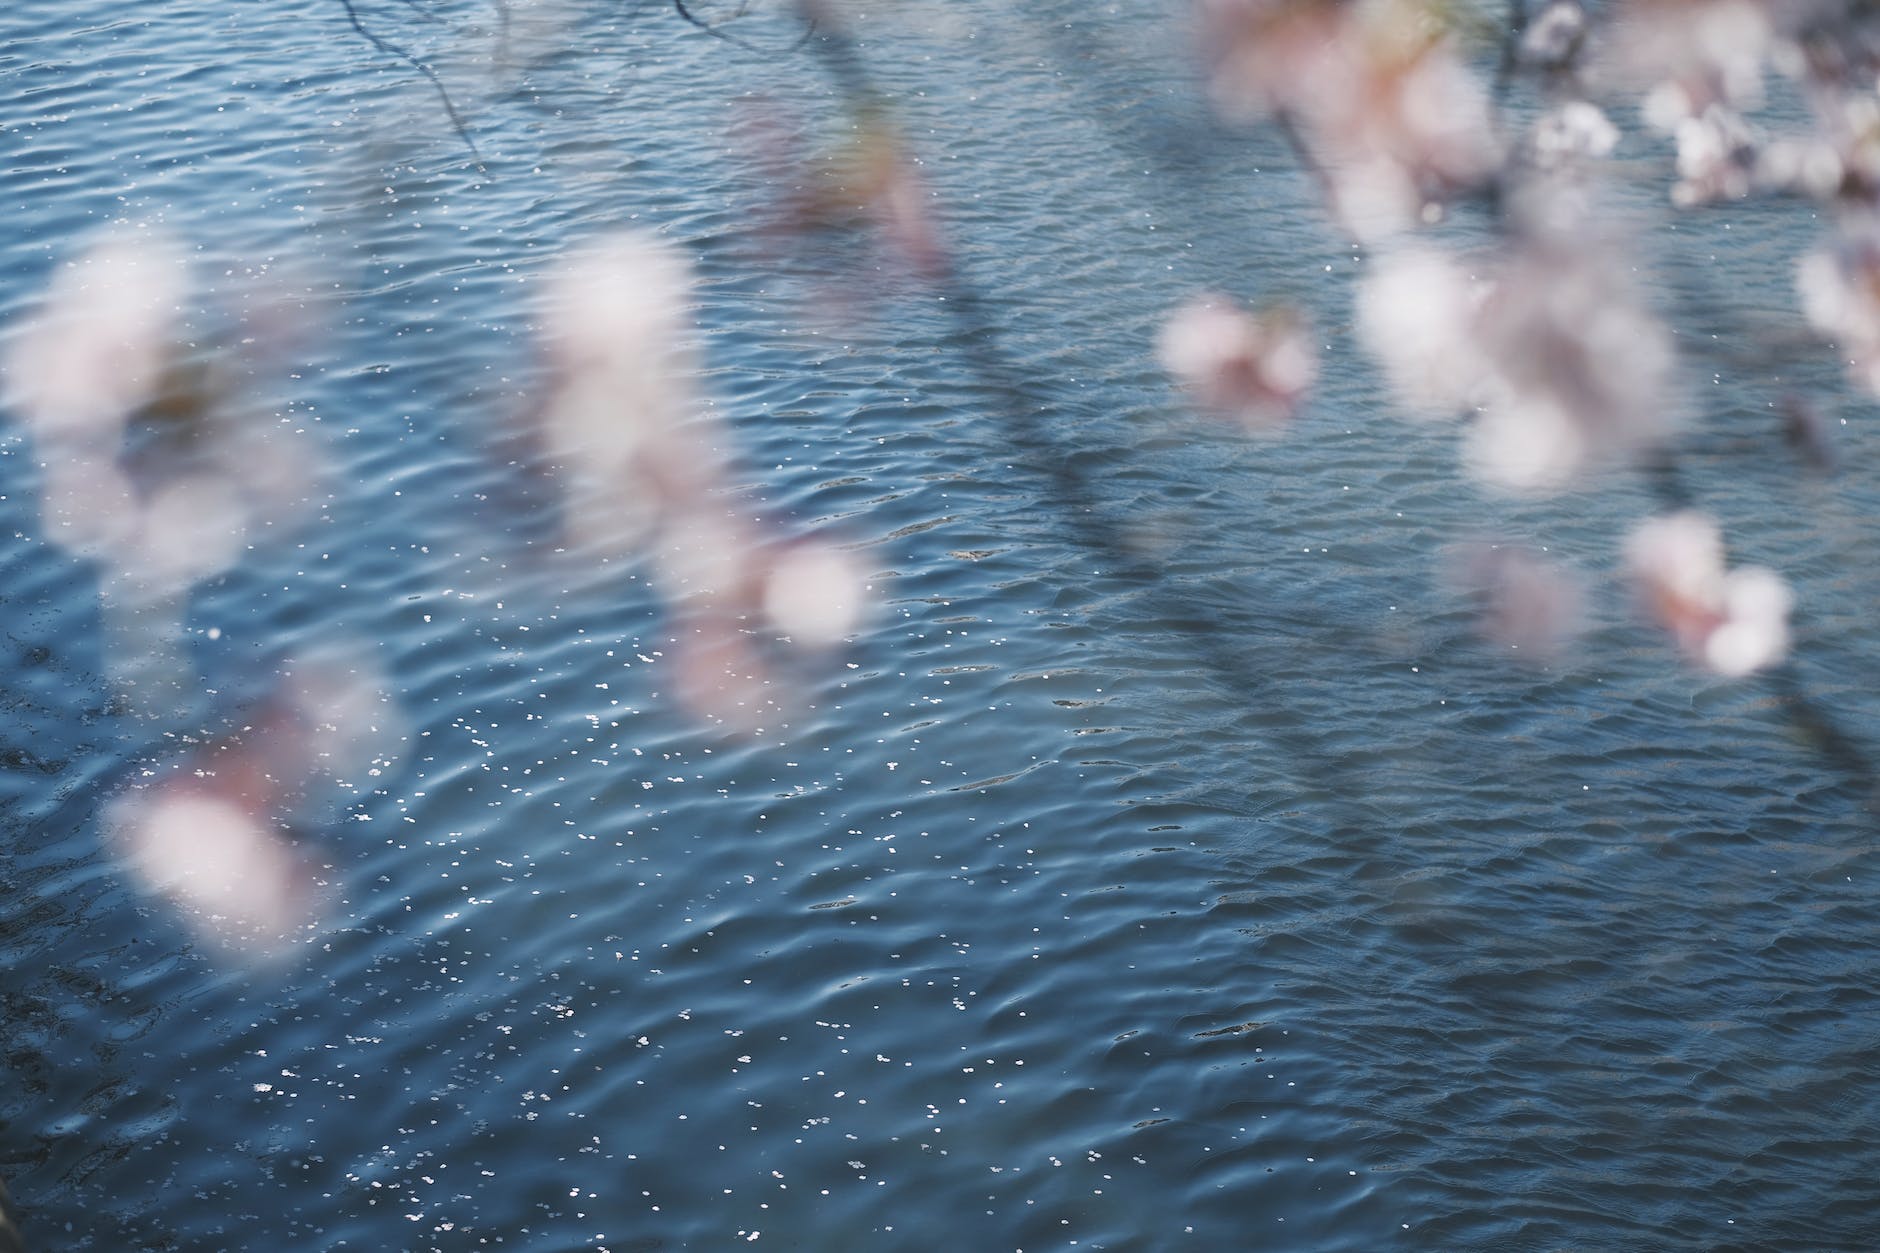 out of focus cherry blossom near a lake